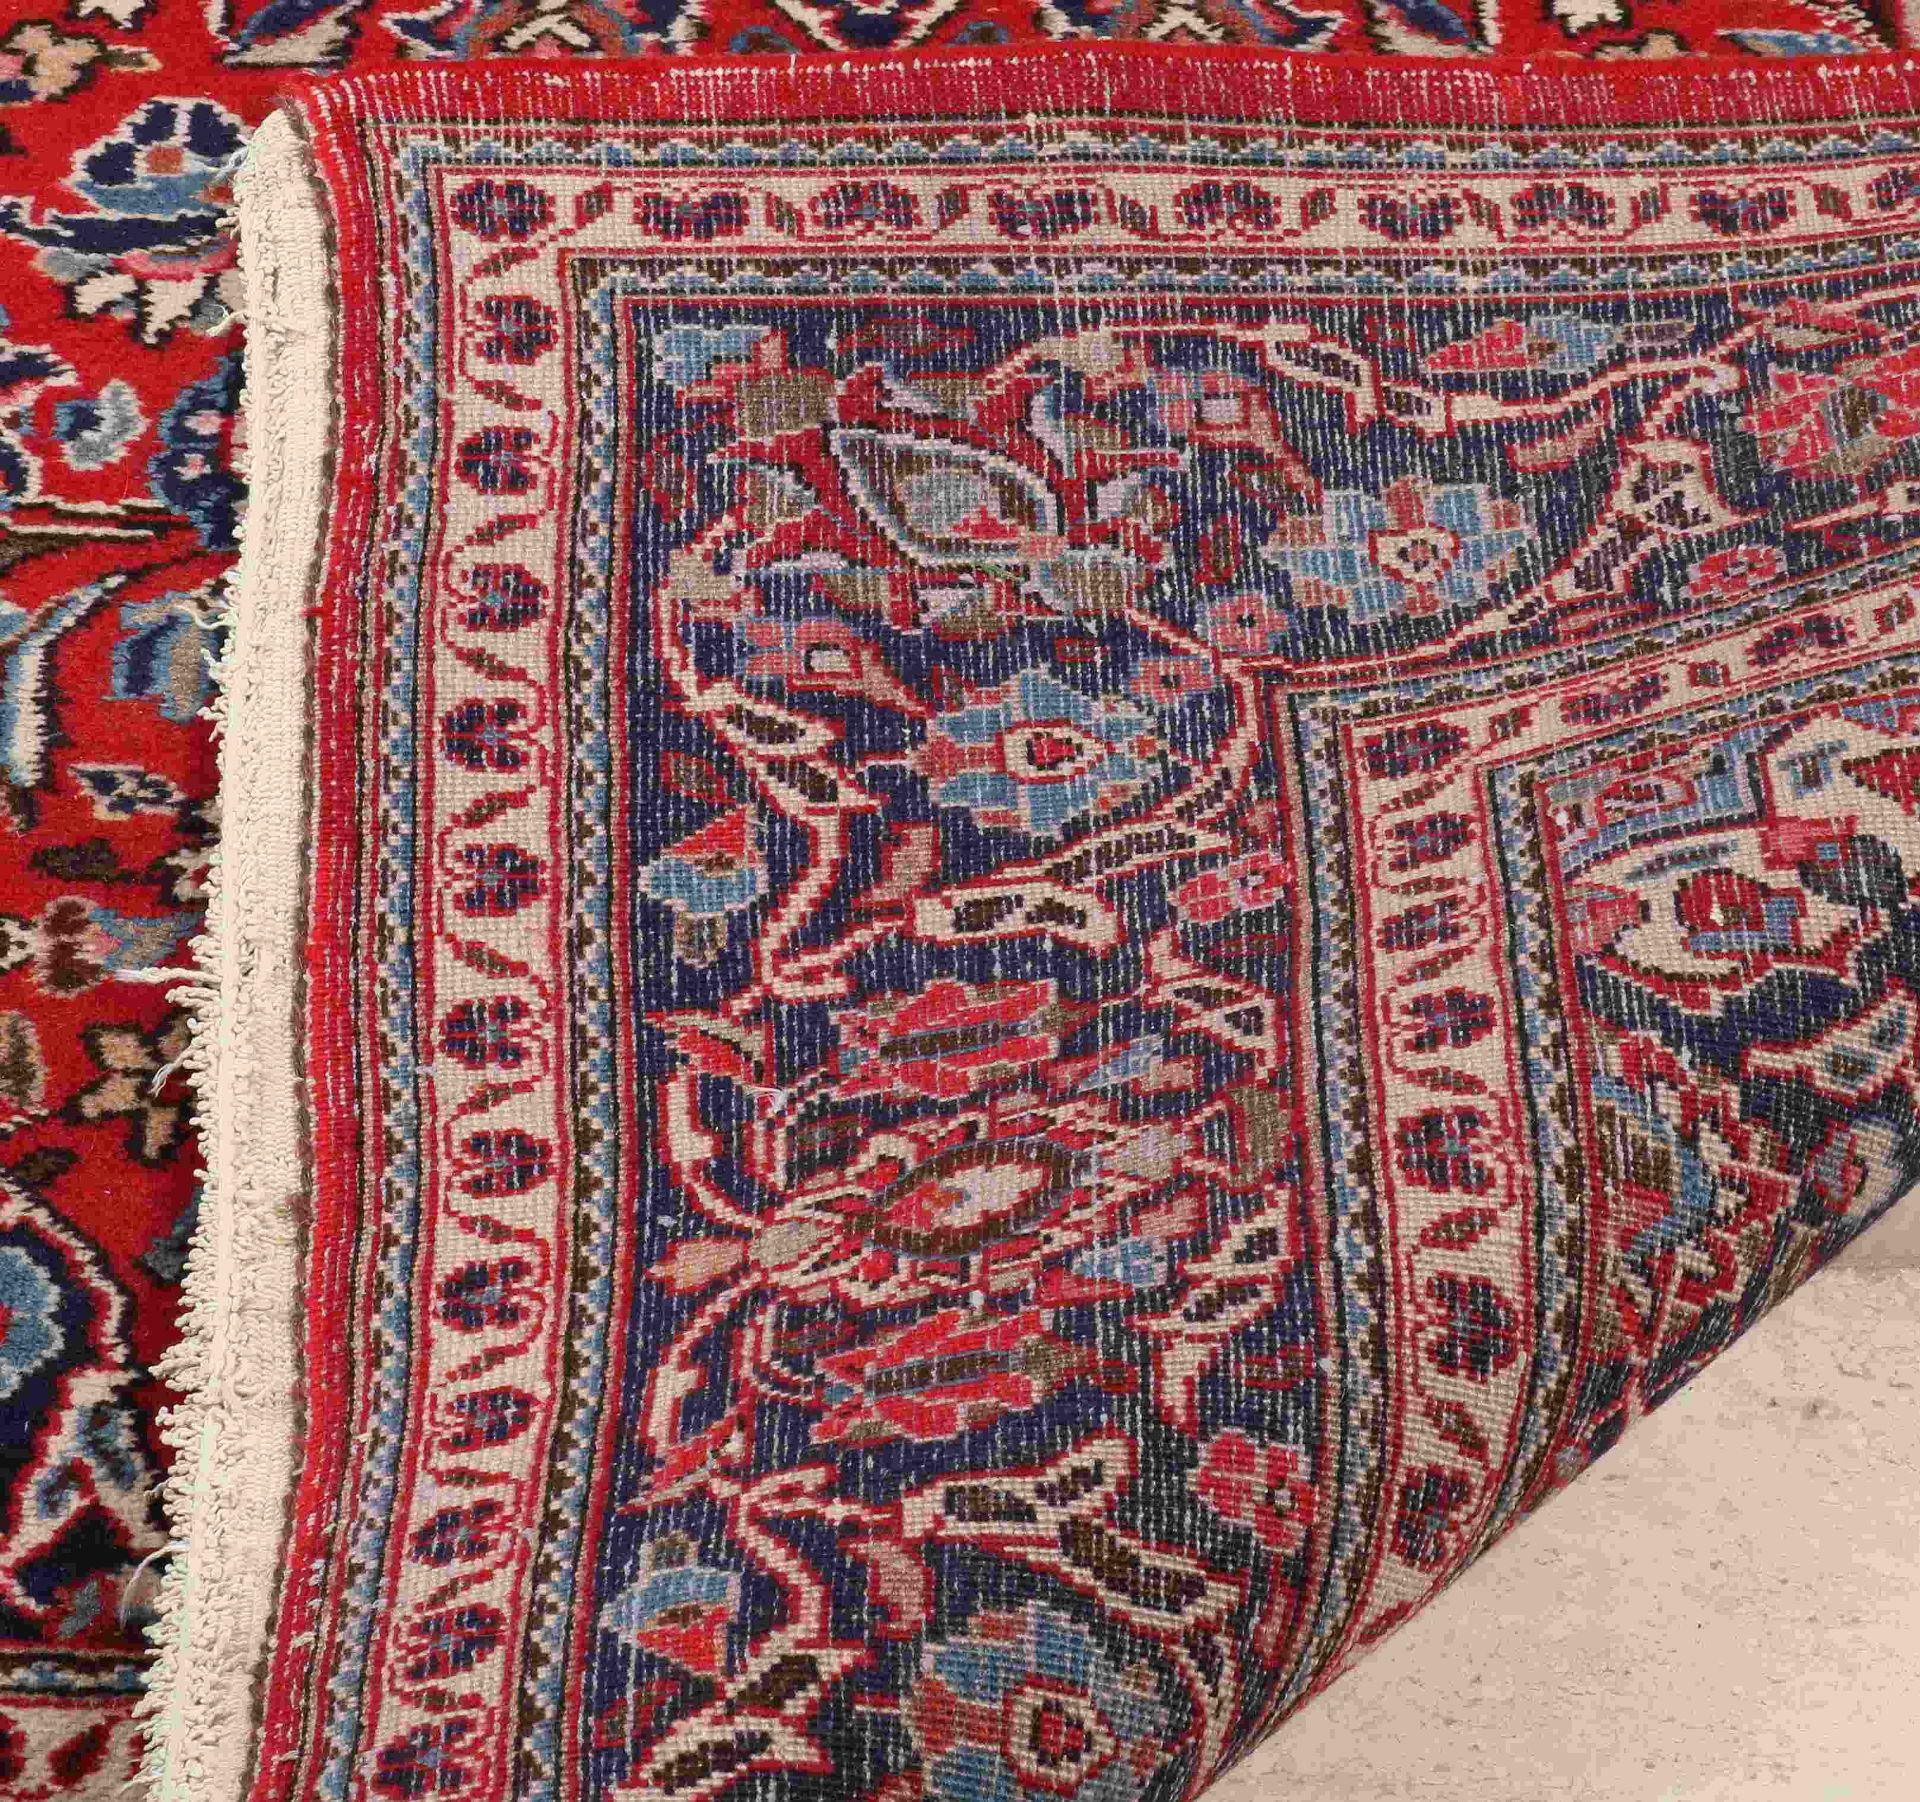 Large Persian rug, 217 x 131 cm. - Image 3 of 3